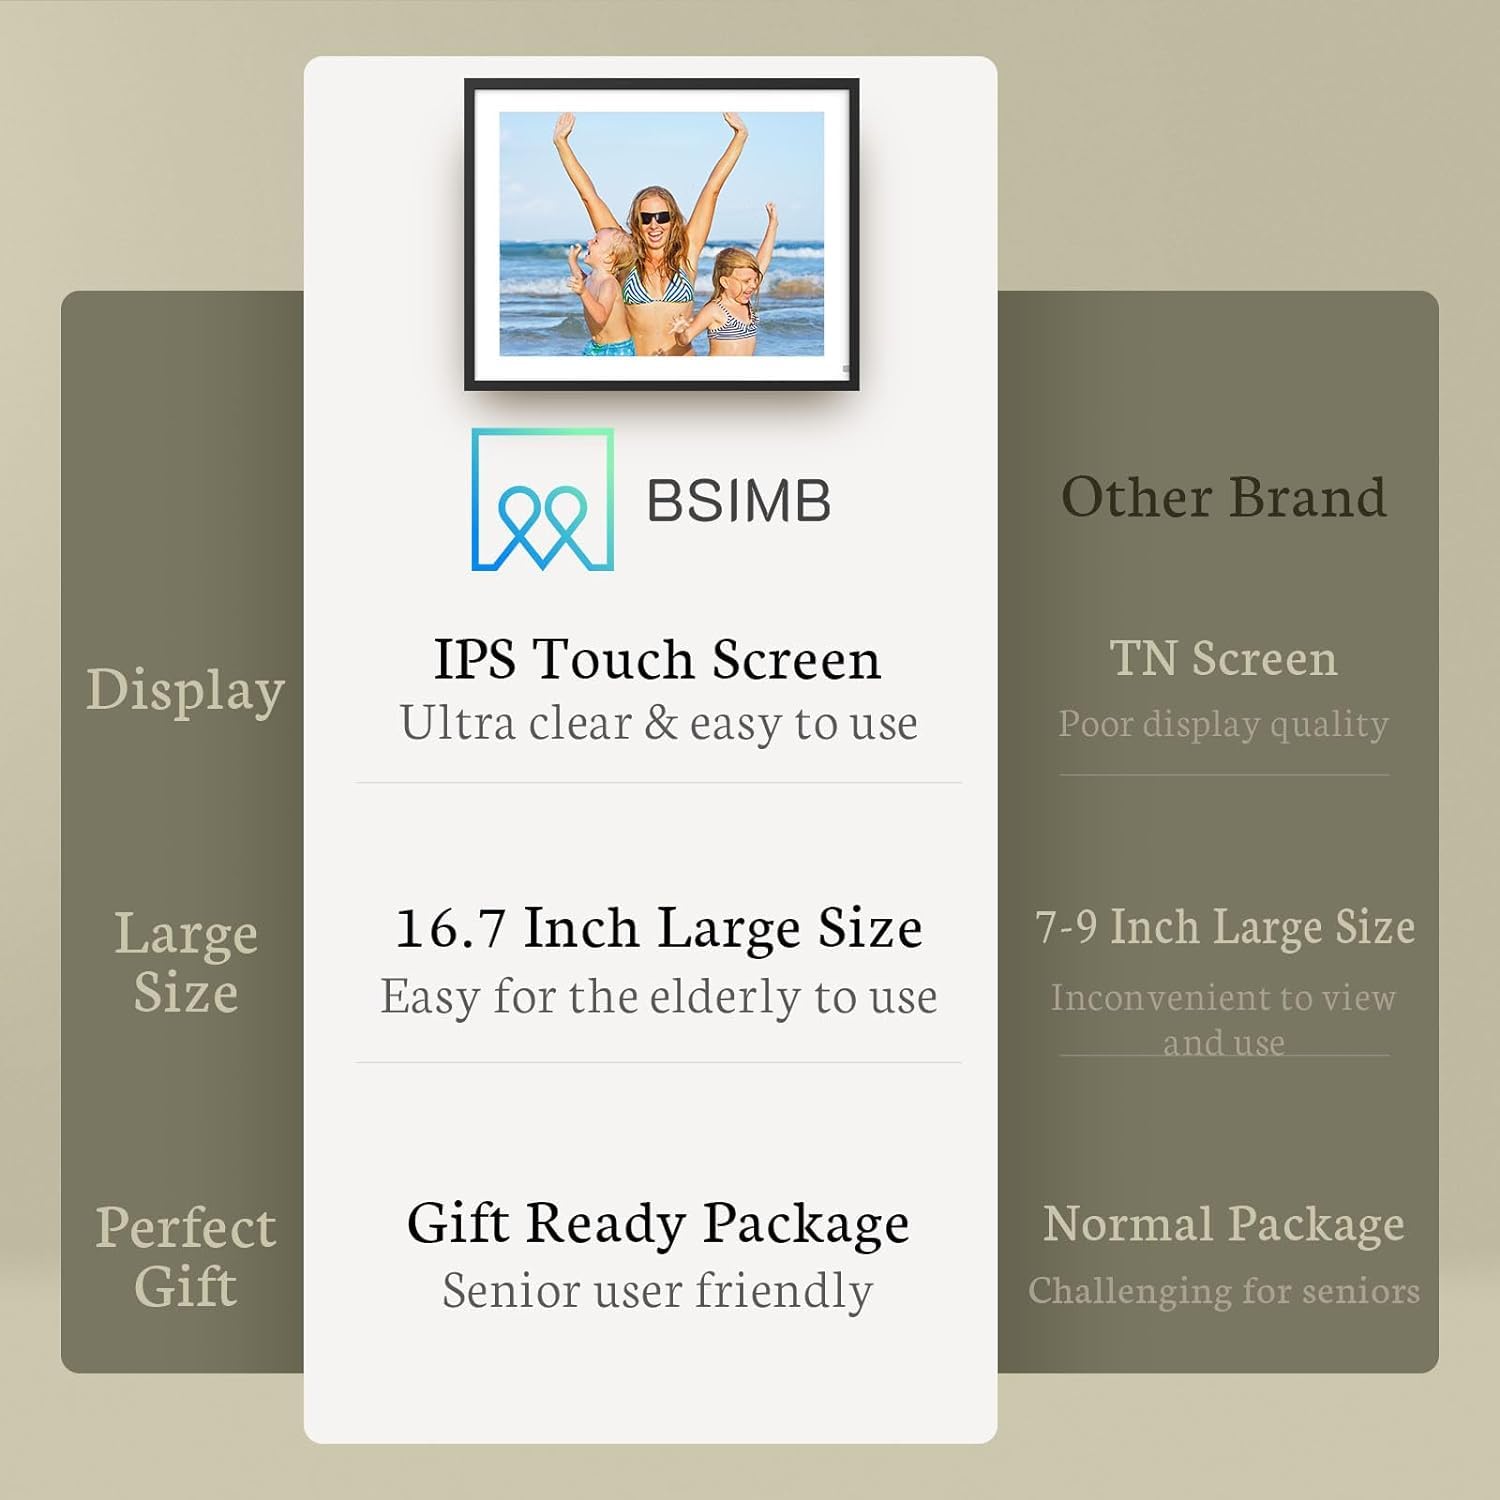 BSIMB 16.7-Inch 32GB Extra Large WiFi Digital Picture Frame IPS Touch Screen Electronic Photo Frame, Remote Control, Auto-Rotate, Share Photos&Videos via App&Email, Gift for Mother's Day